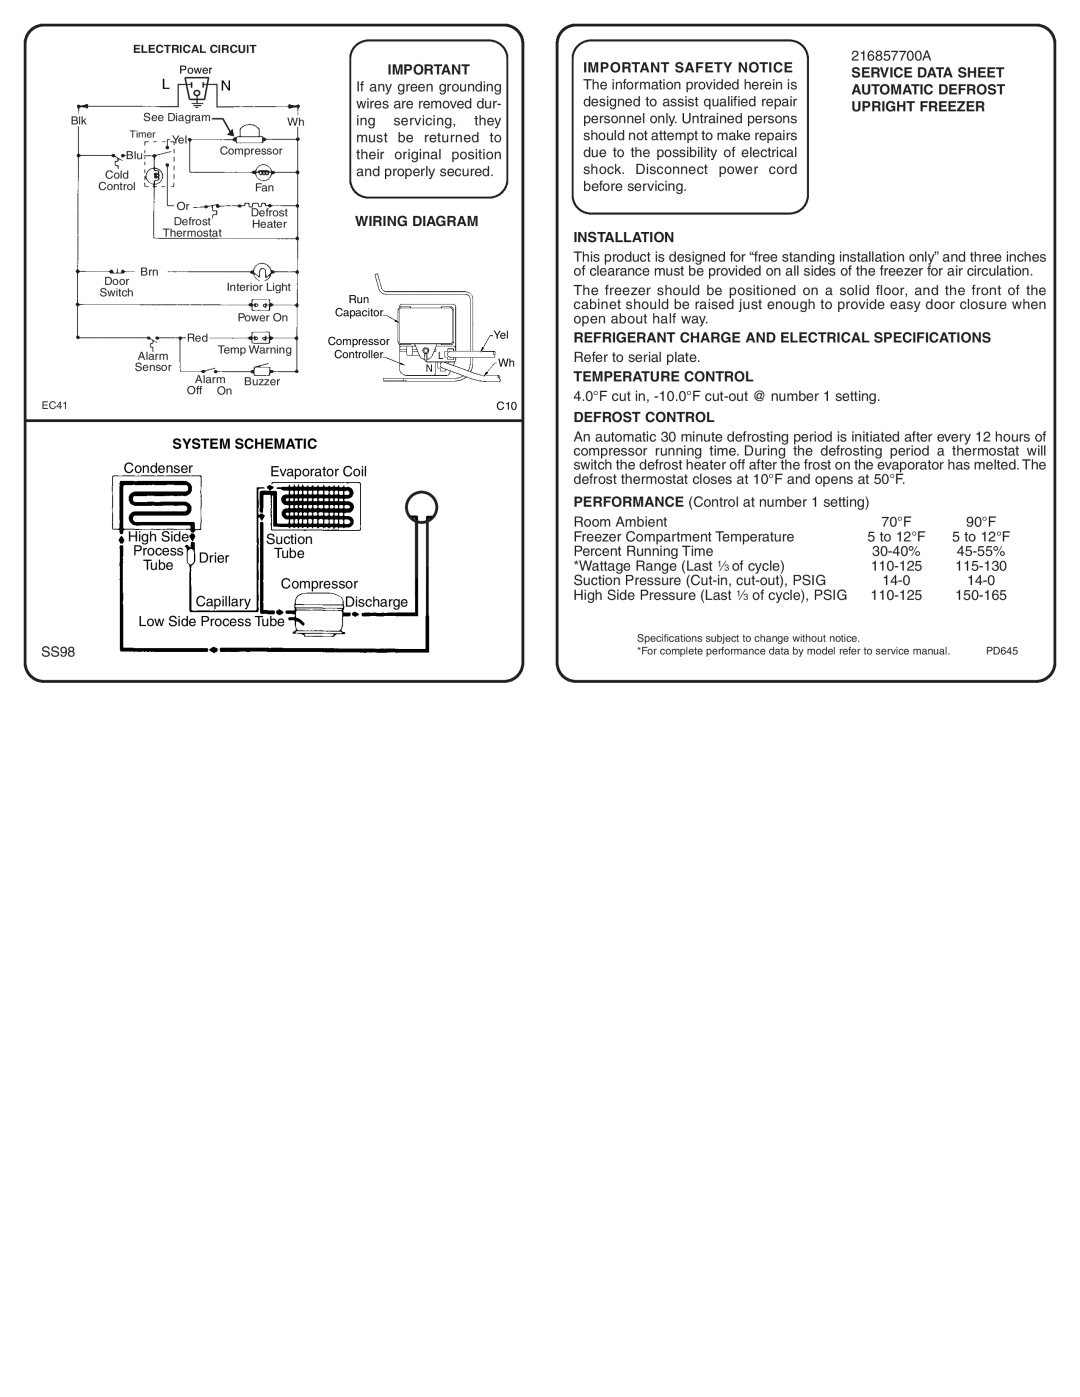 Frigidaire 216857700A specifications Wiring Diagram, Important Safety Notice, Service Data Sheet, Upright Freezer 